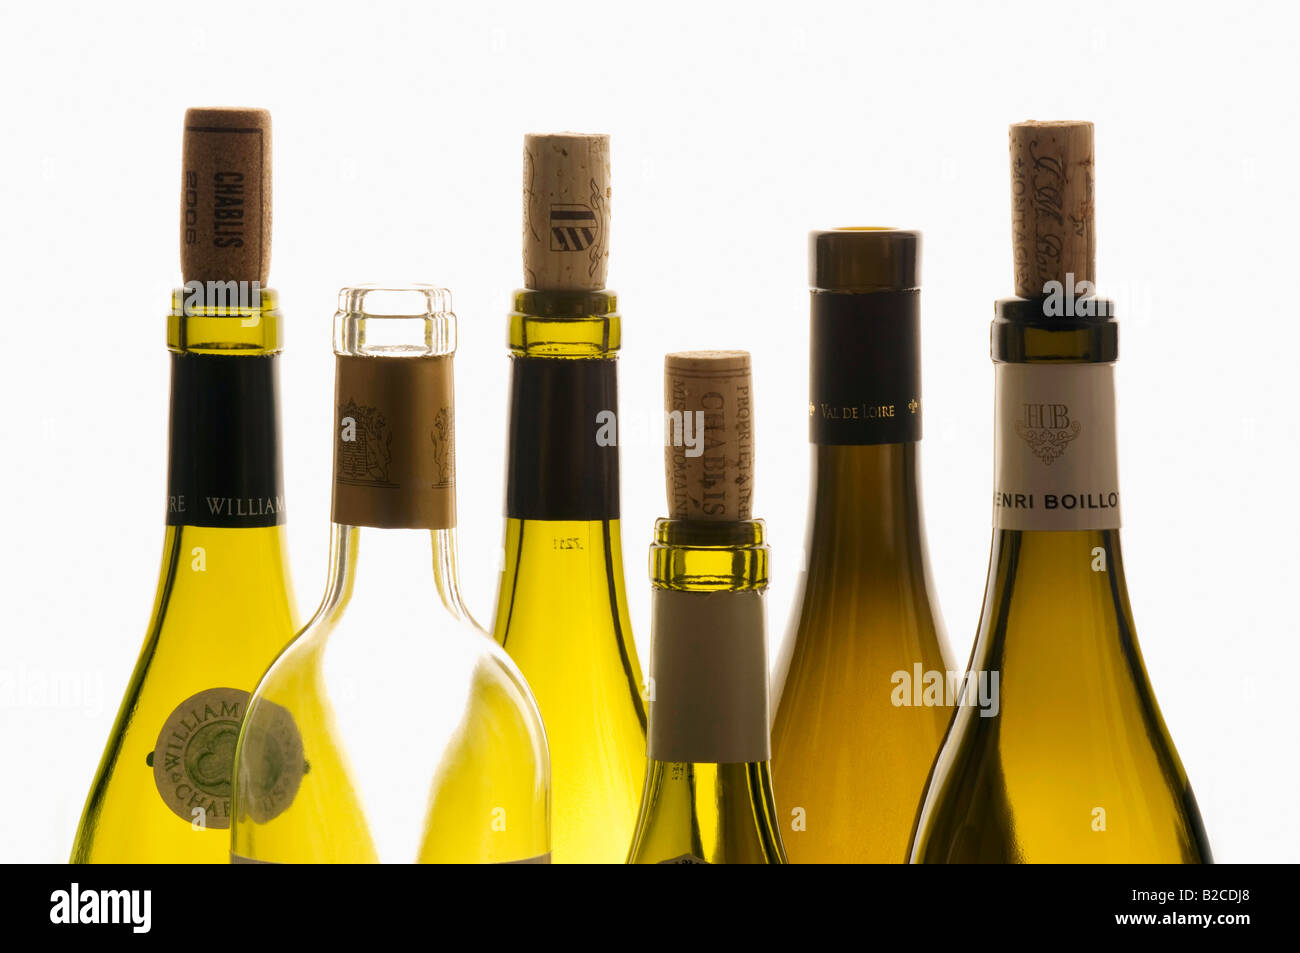 Selection of French fine wine bottles Stock Photo